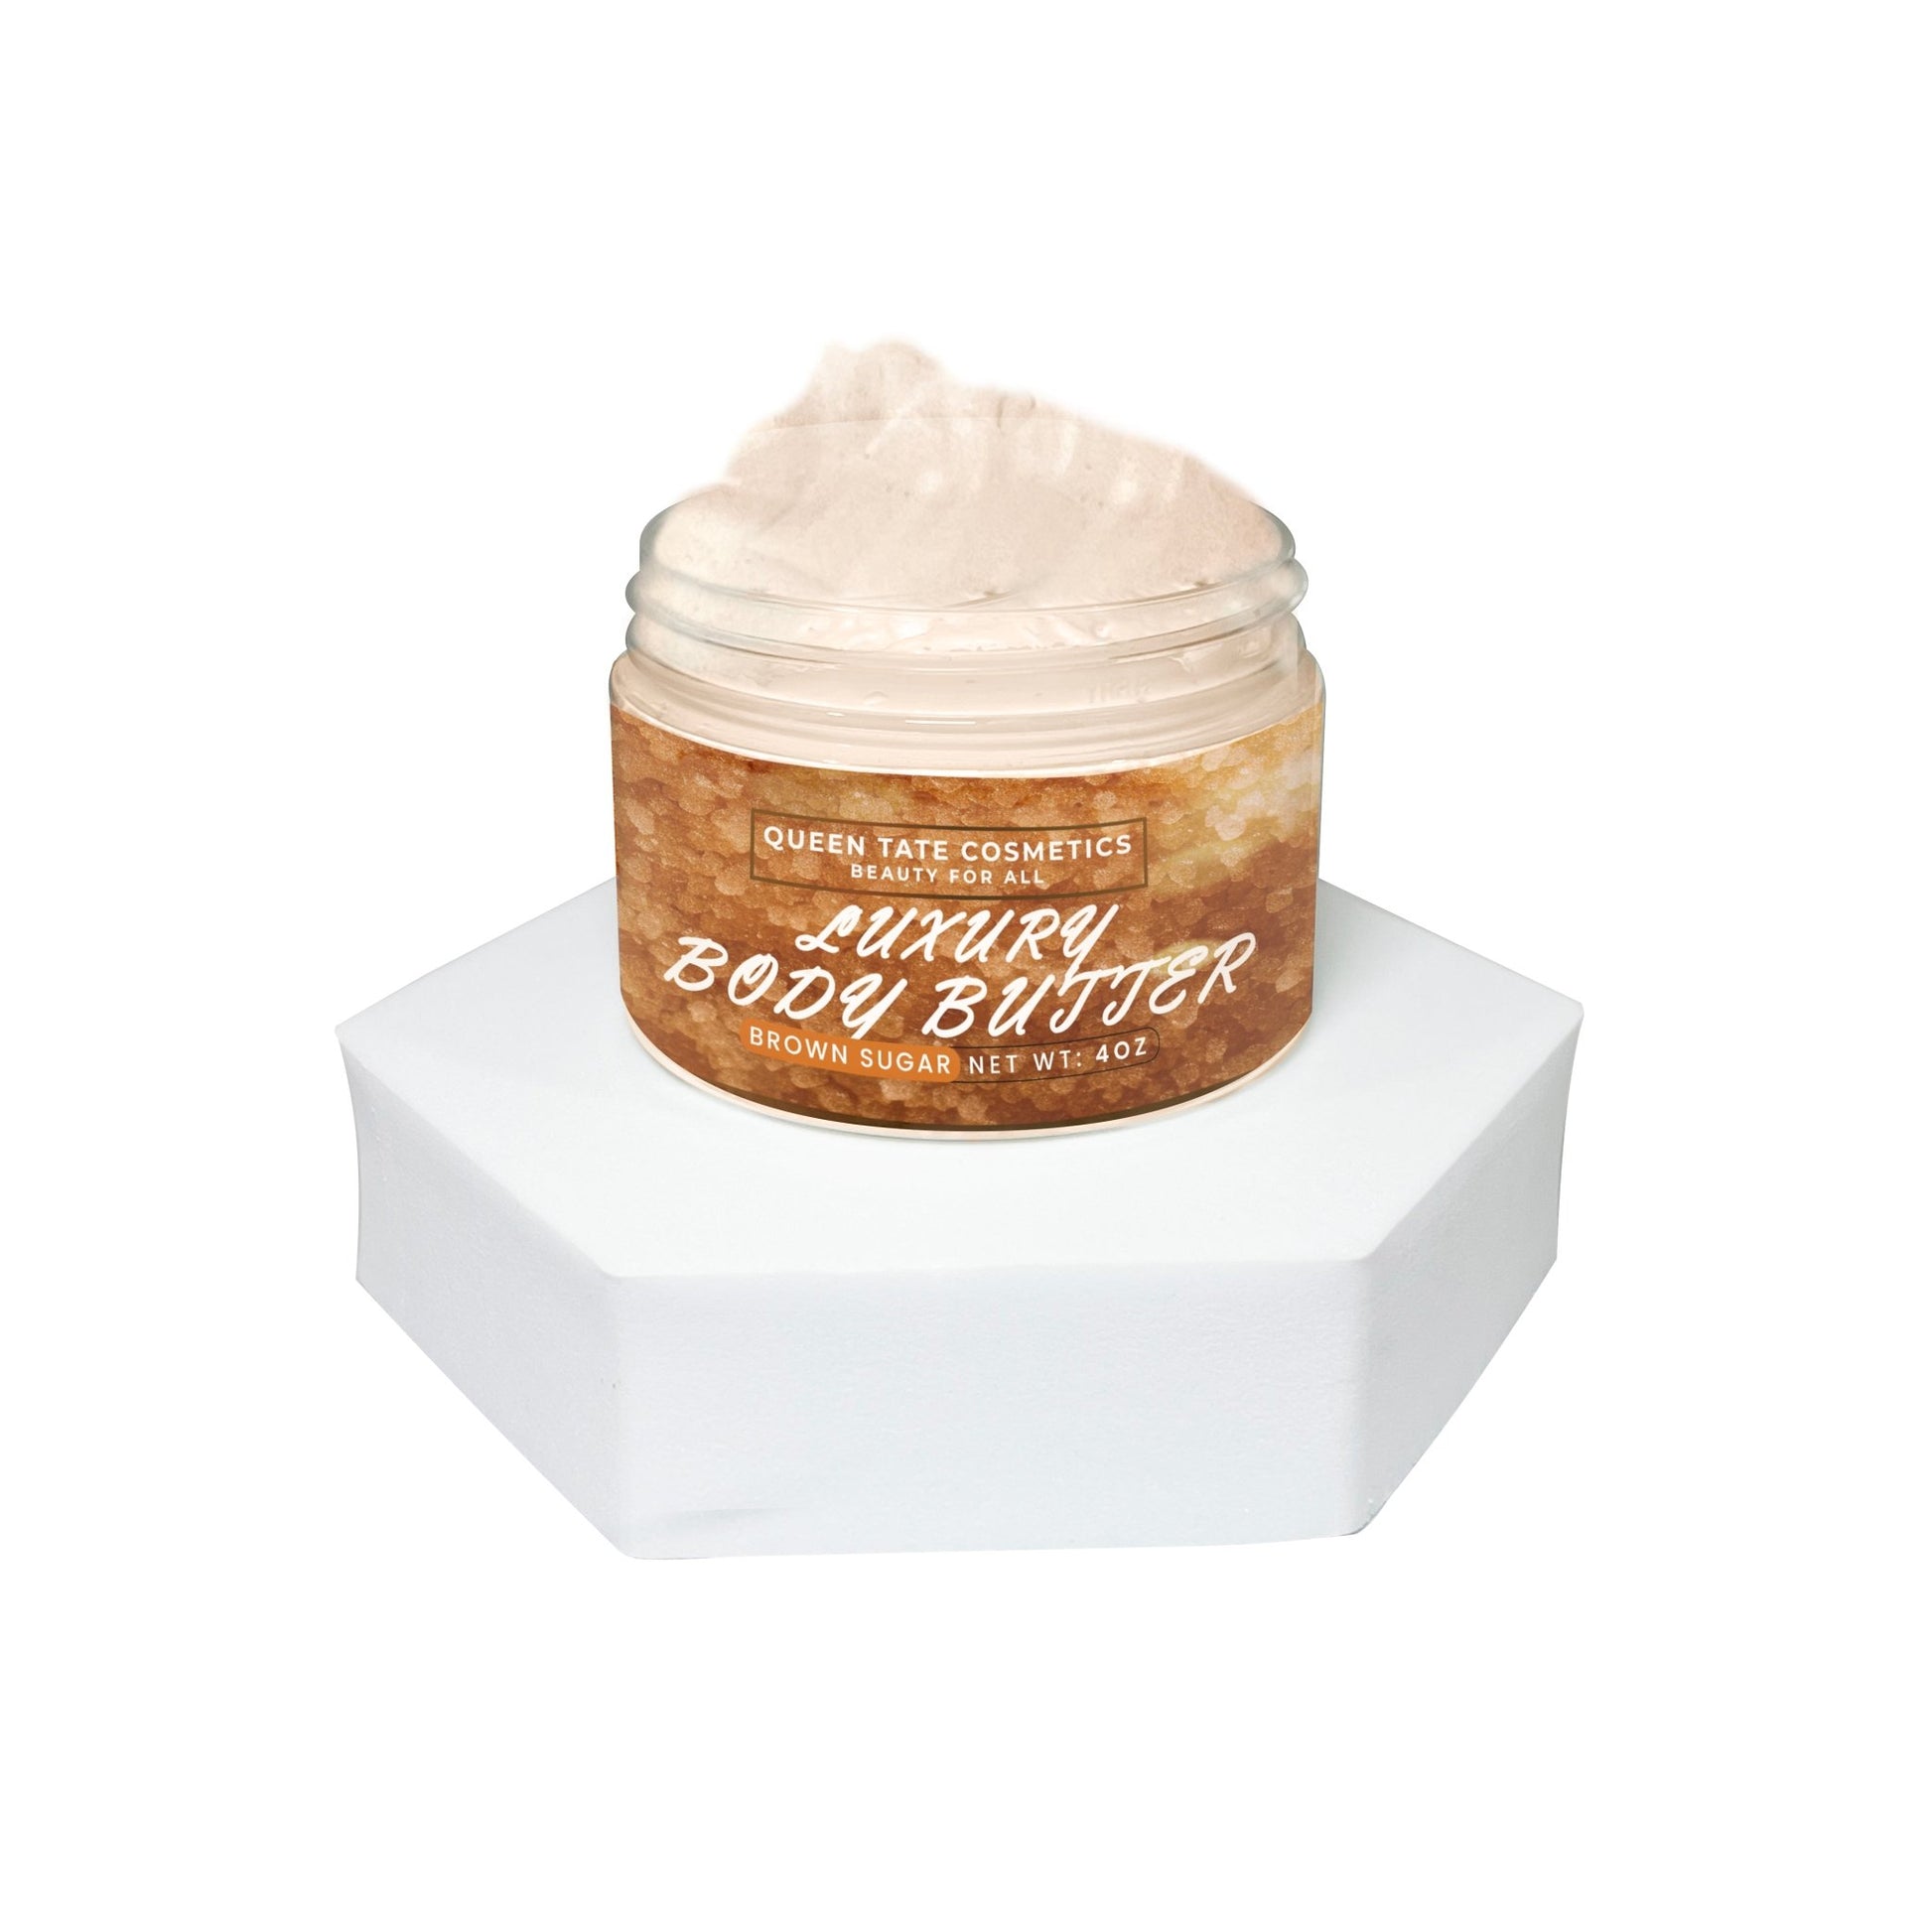 Brown Sugar-Handcrafted Body Butter - Queen Tate CosmeticsHandcrafted Luxury Body ButterBrown Sugar-Handcrafted Body ButterHandcrafted Luxury Body ButterQueen Tate Cosmetics 4oz